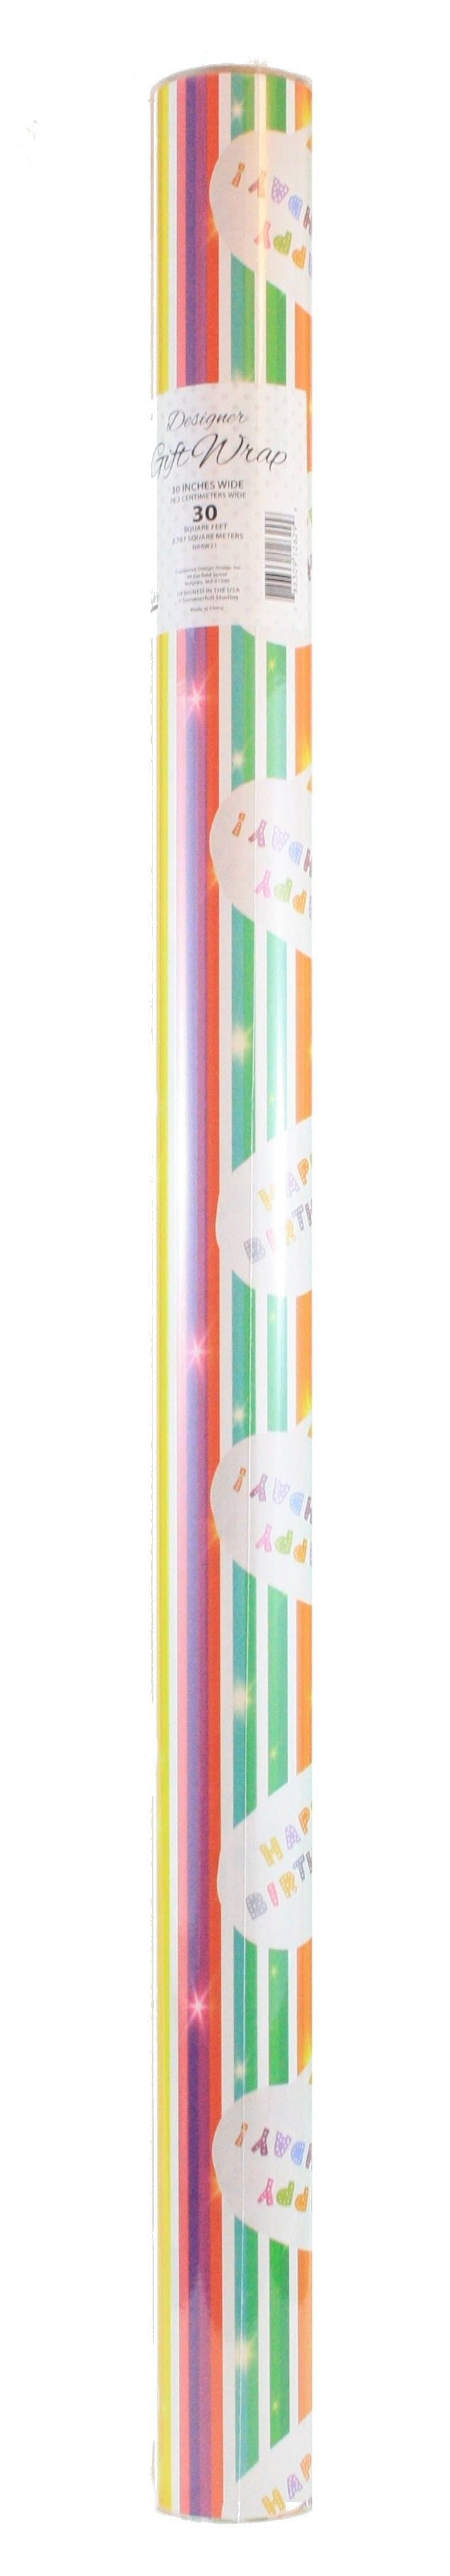 Paper Images Designer Roll Wrap 30 Square Feet (Cosmic Birthday) - Shelburne Country Store